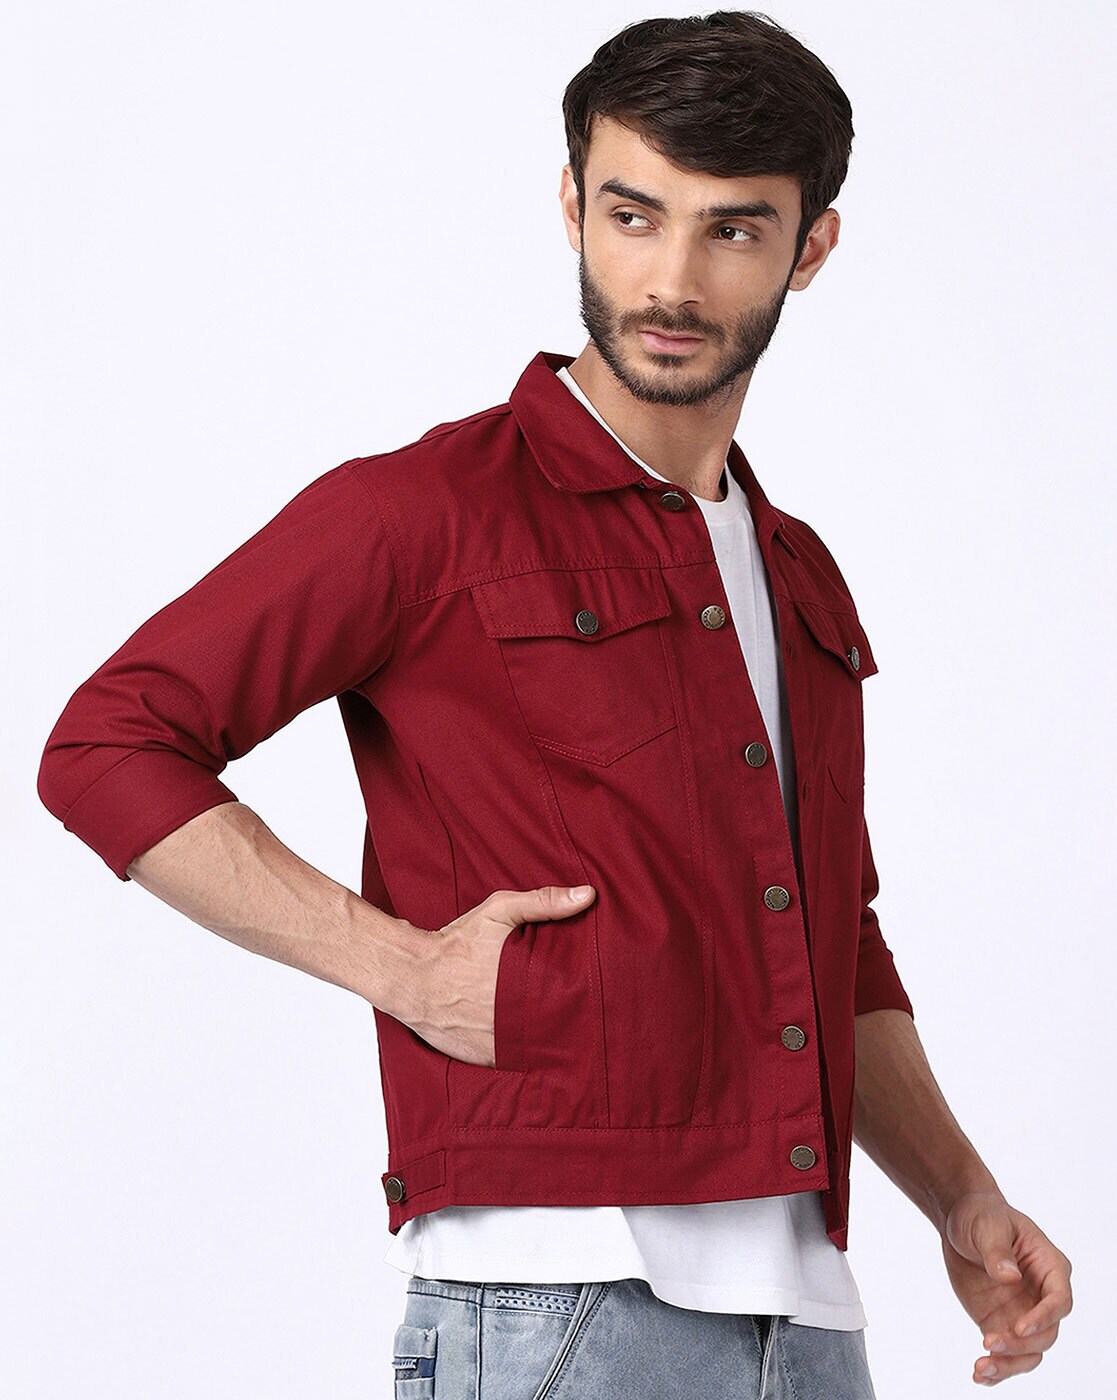 STREET 9 Women Maroon Solid Denim Jacket Price in India, Full  Specifications & Offers | DTashion.com